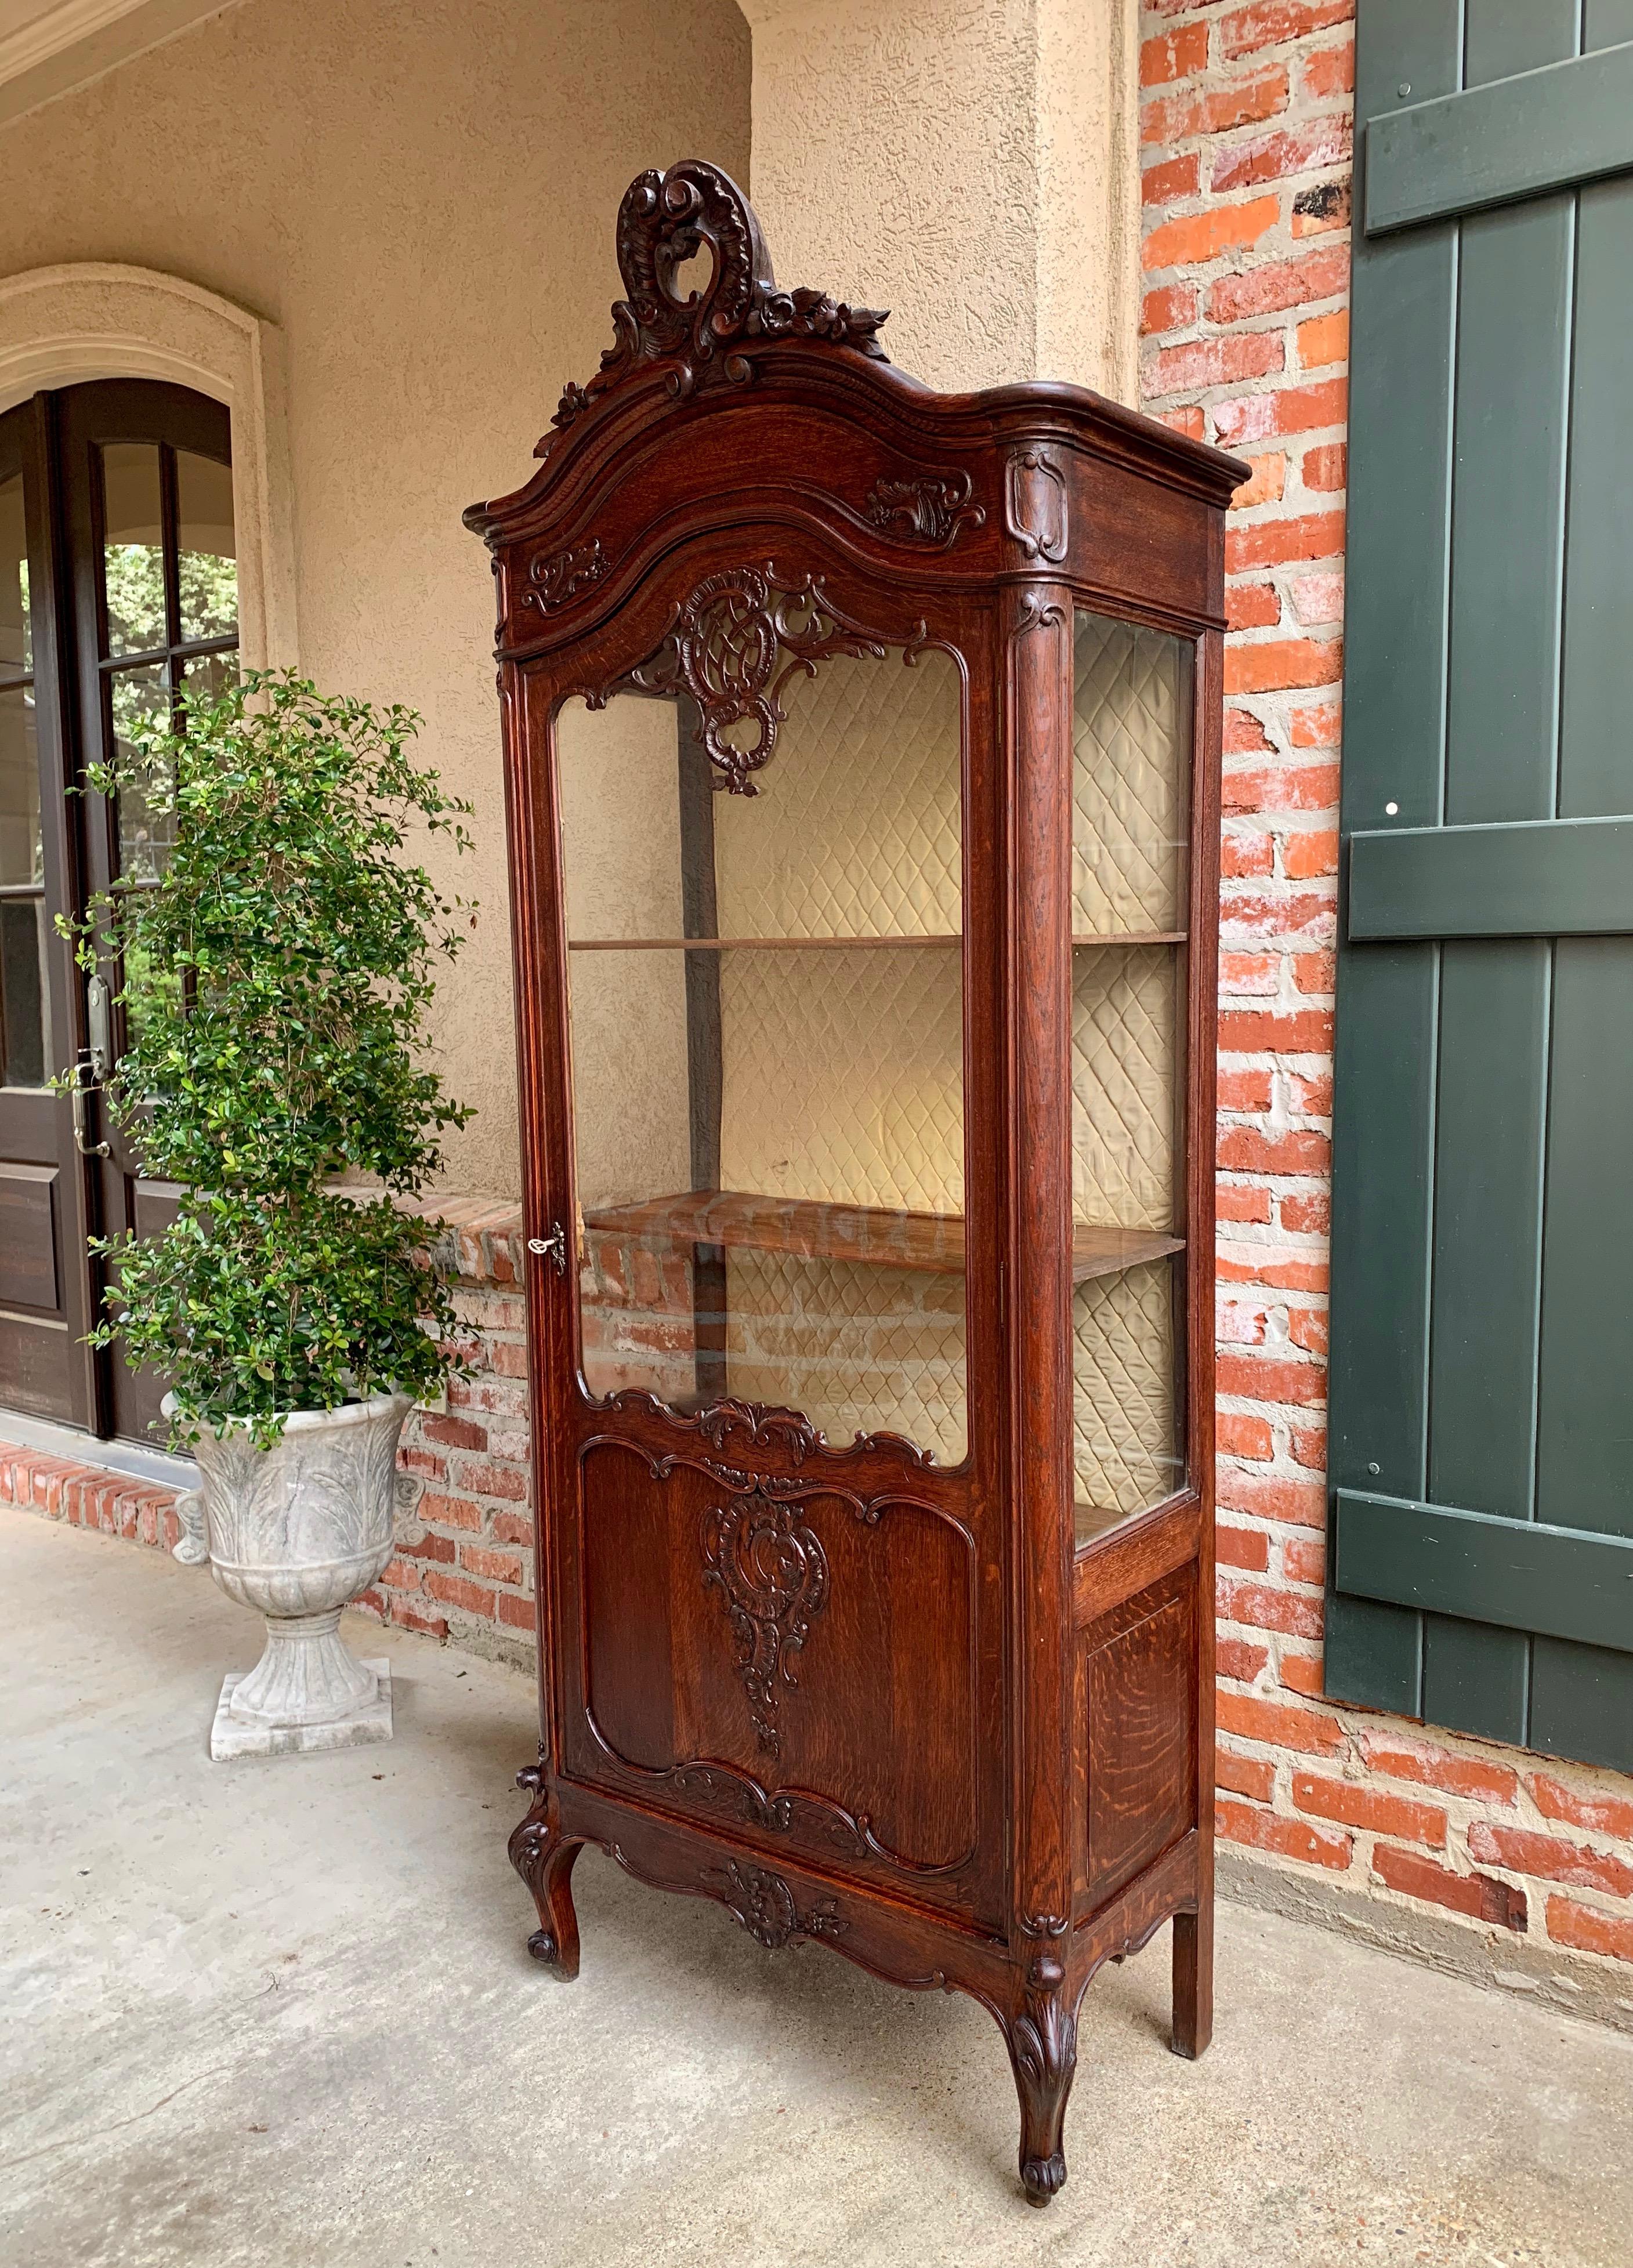 Direct from France, a stunning antique French display cabinet with gorgeous hand carvings from top to bottom!
~ Solid hand carved upper crown sits above the arch dome top and features open flourish and carved floral accents
~ Carved details on the